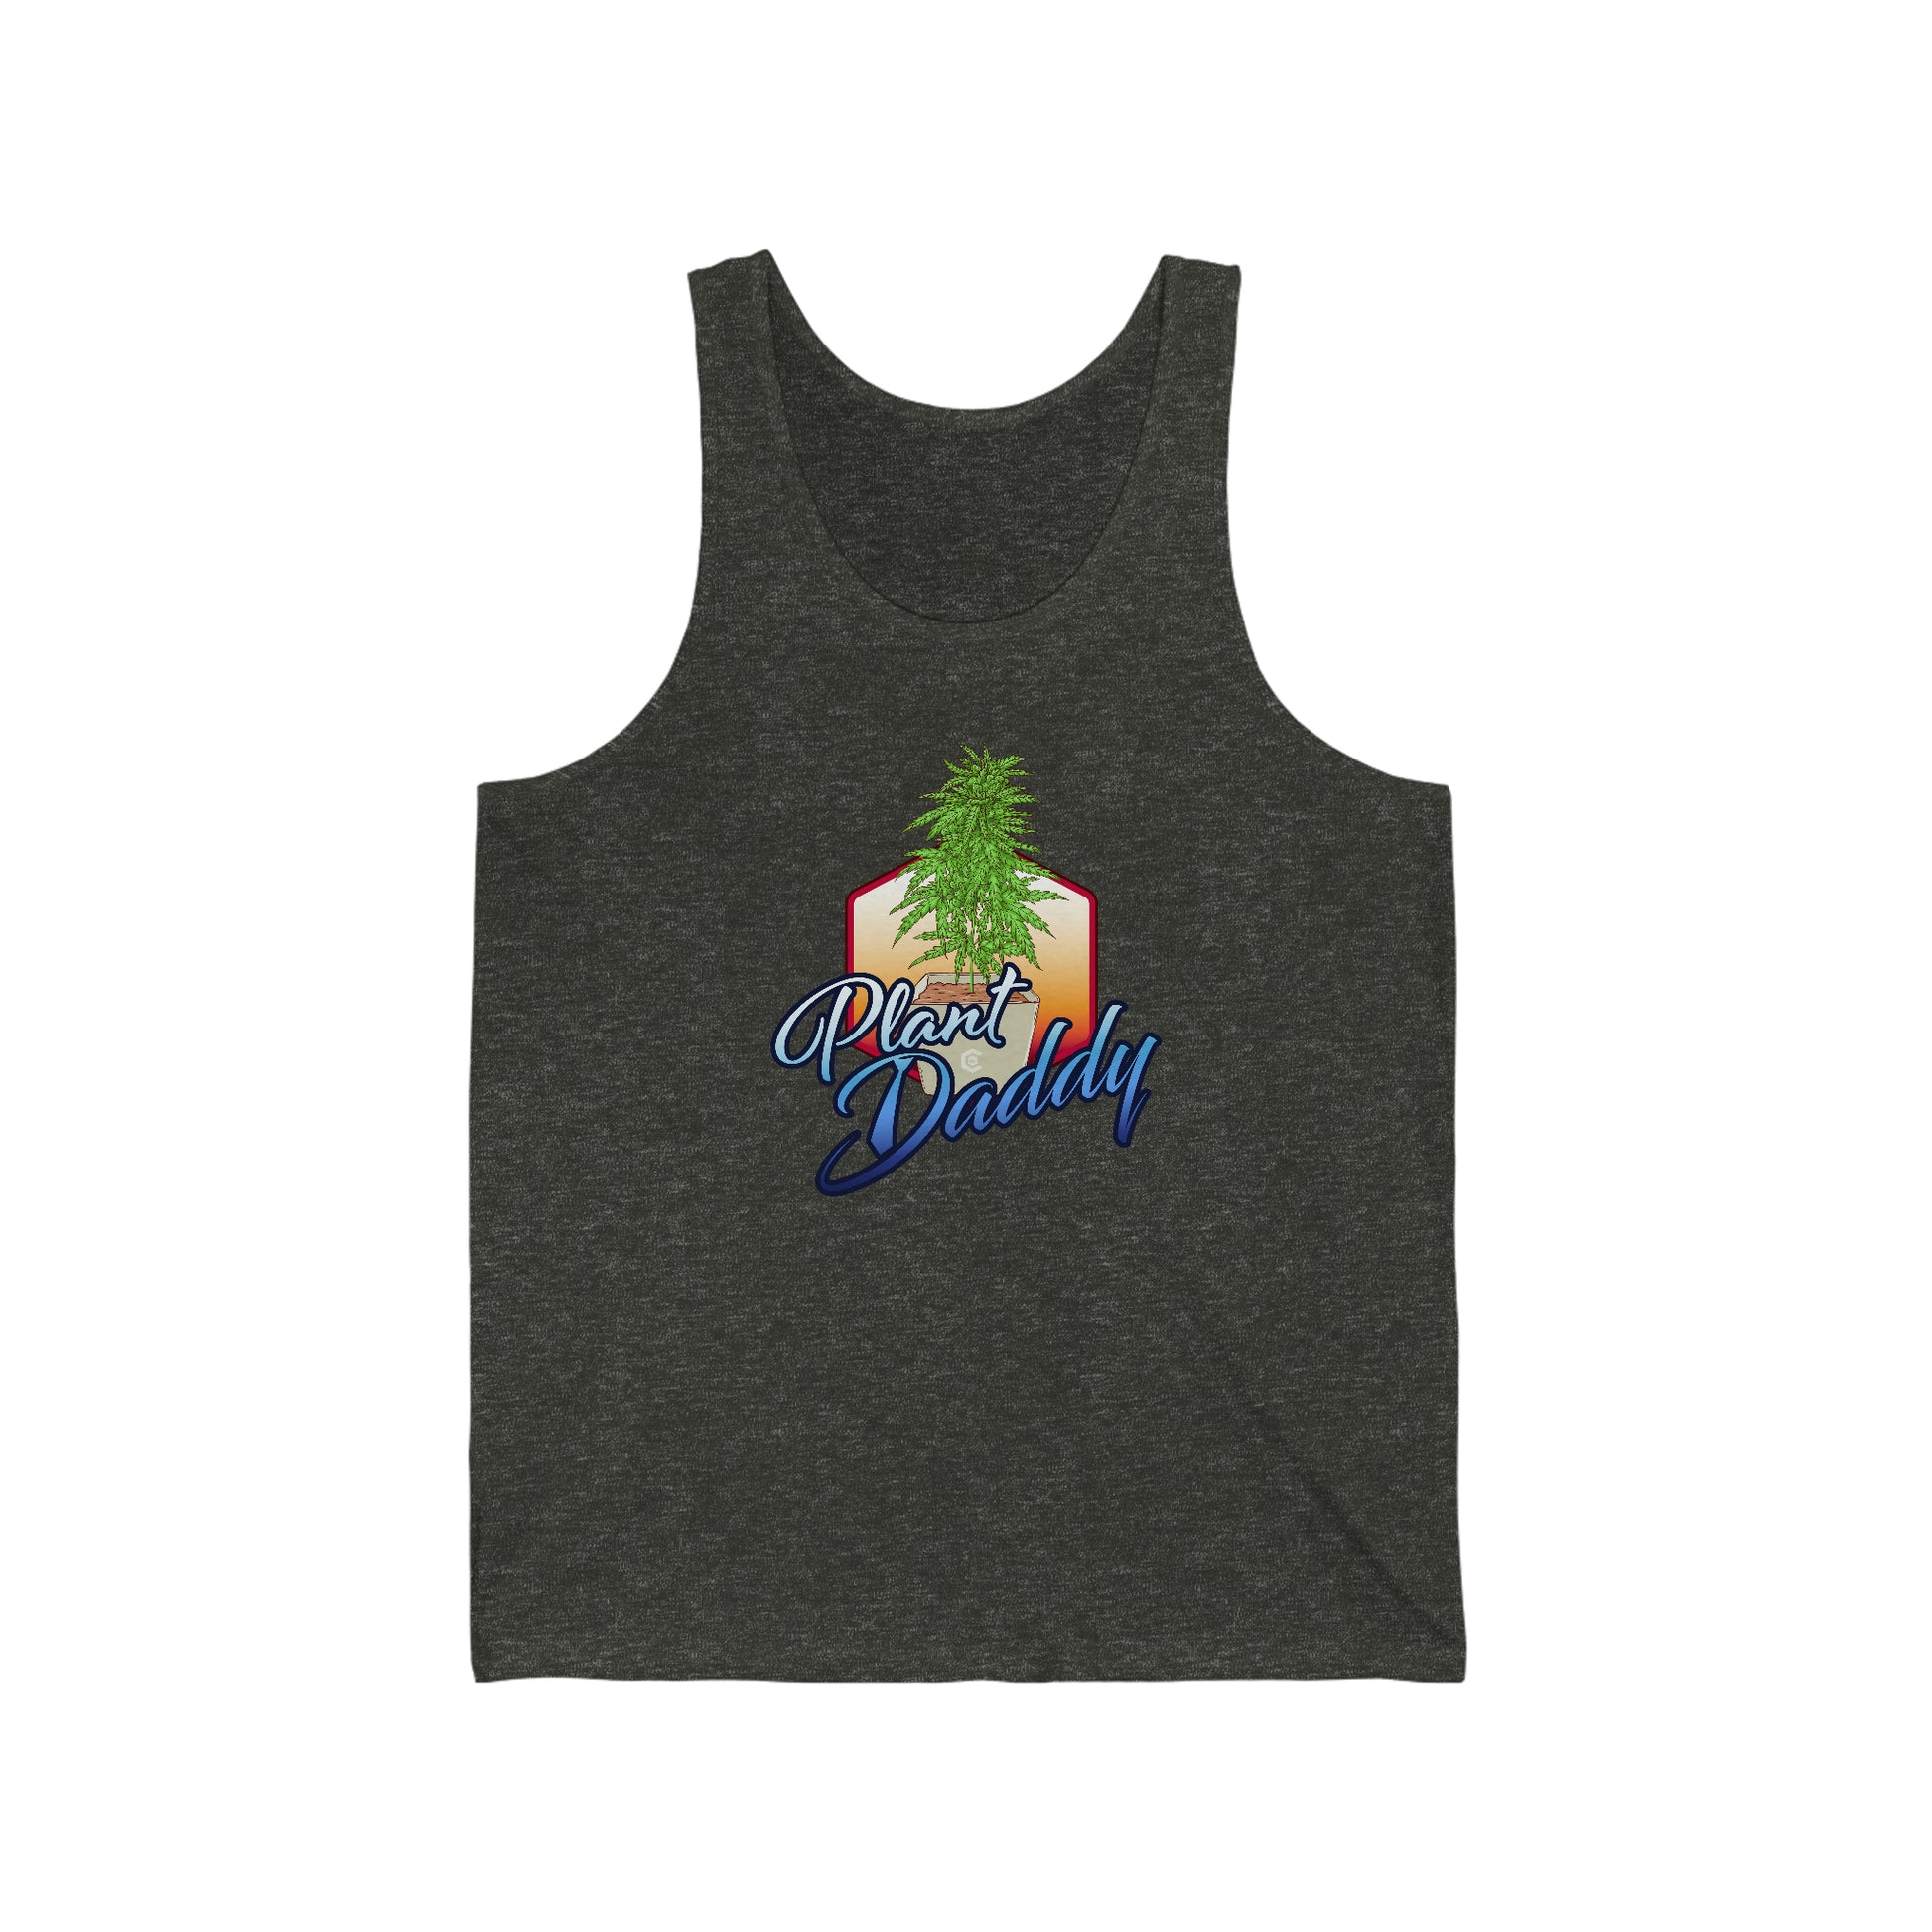 a Plant Daddy Weed Jersey Tank Top with a marijuana leaf on it.